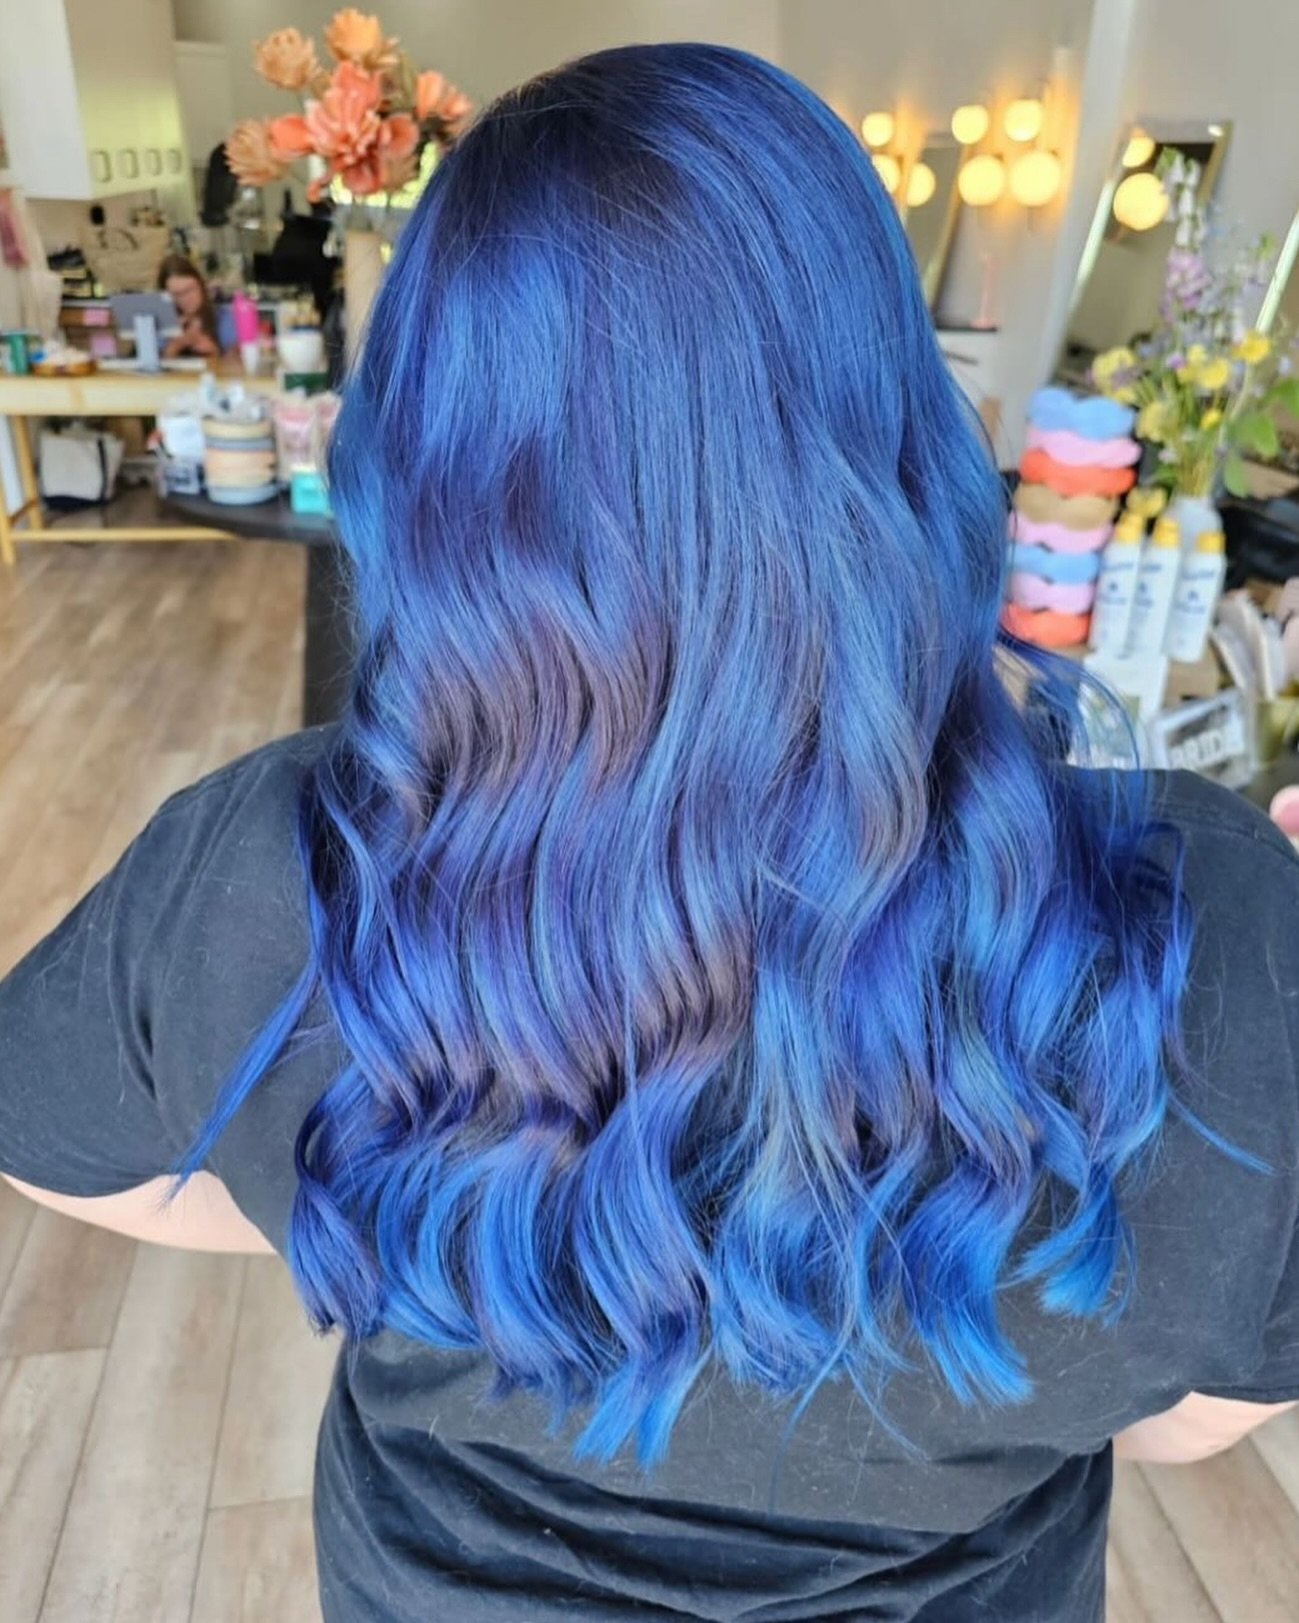 Summer vibes just got a whole lot cooler! Blue hair shining bright under the sun? Yes, please! Embrace the heat and rock that bold, beautiful blue all summer long! 💙

#bluehairsummer #summervibes #littlerocksalon #littlerockcolorist #littlerockhairs